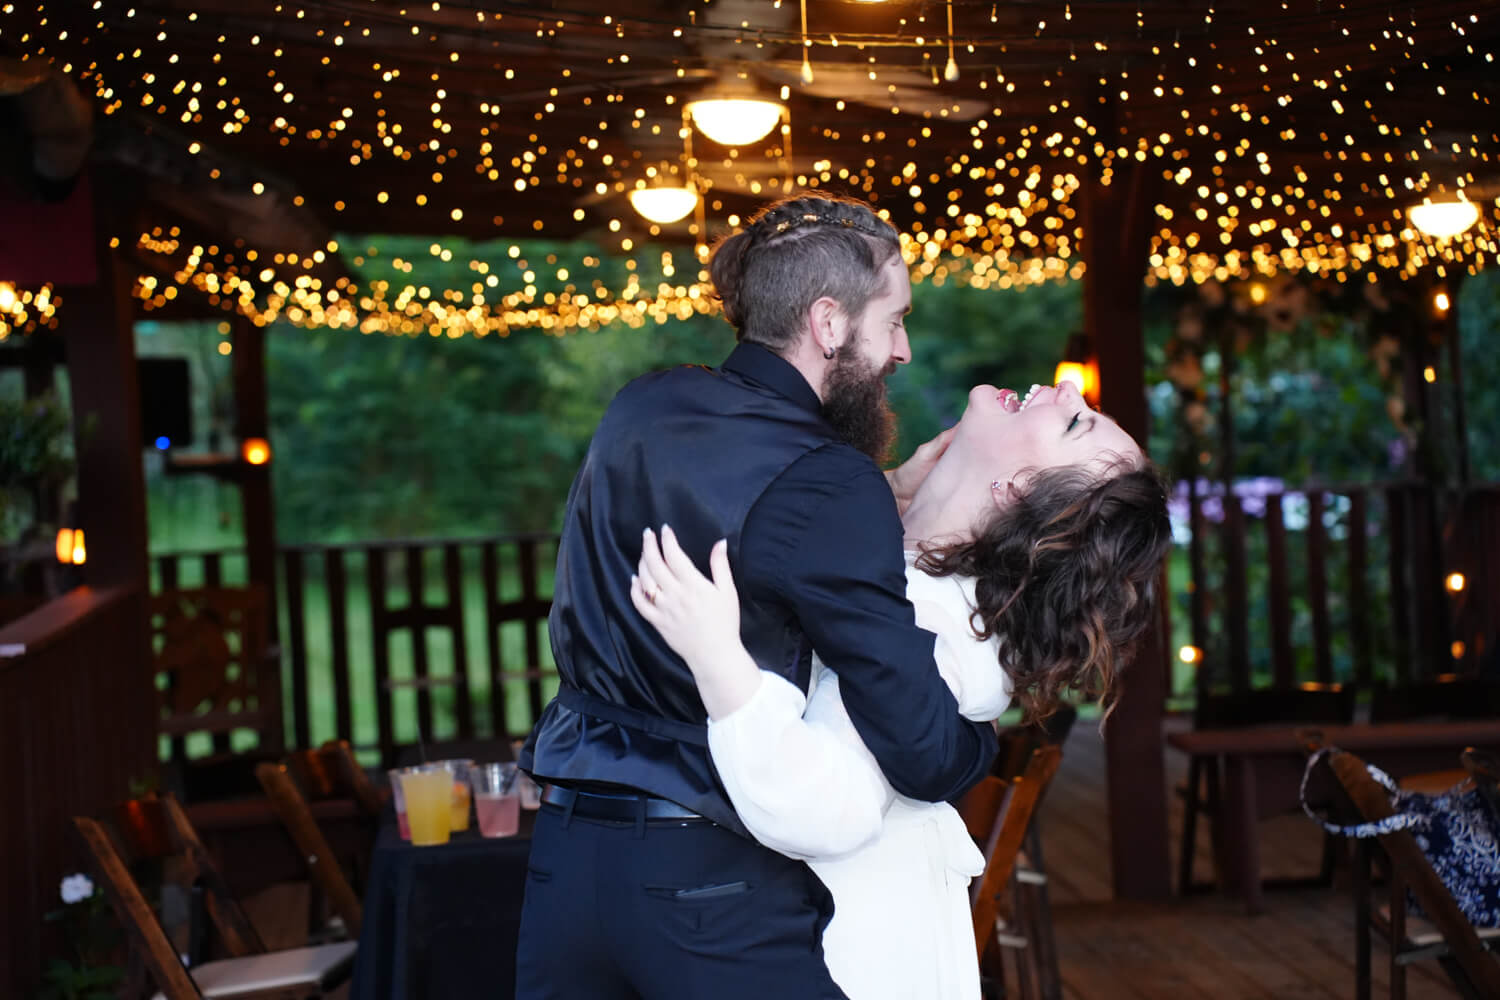 Groom dipping his bride beneath warm fairy lights on the ceiling of a creekside pavilion at their wedding reception